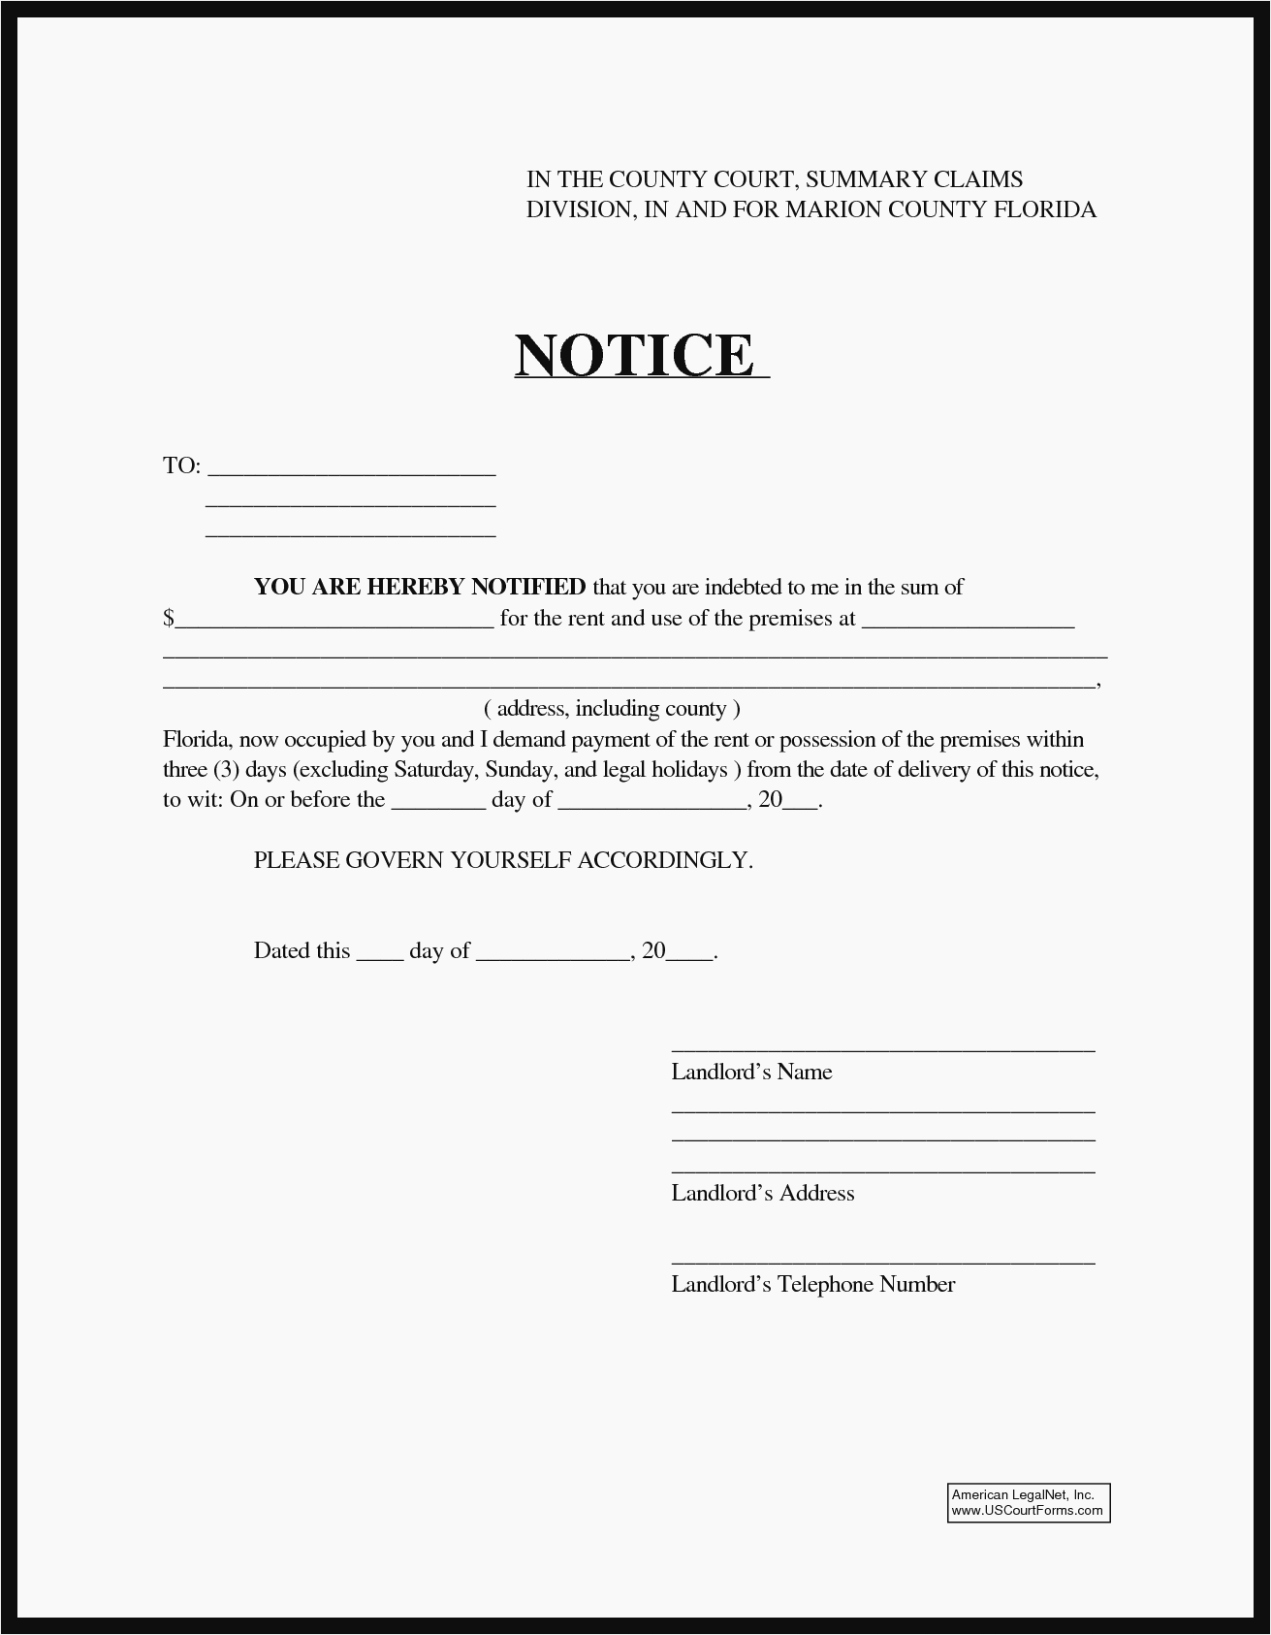 Florida Eviction Notice Template Awesome the Real Reason Behind 15